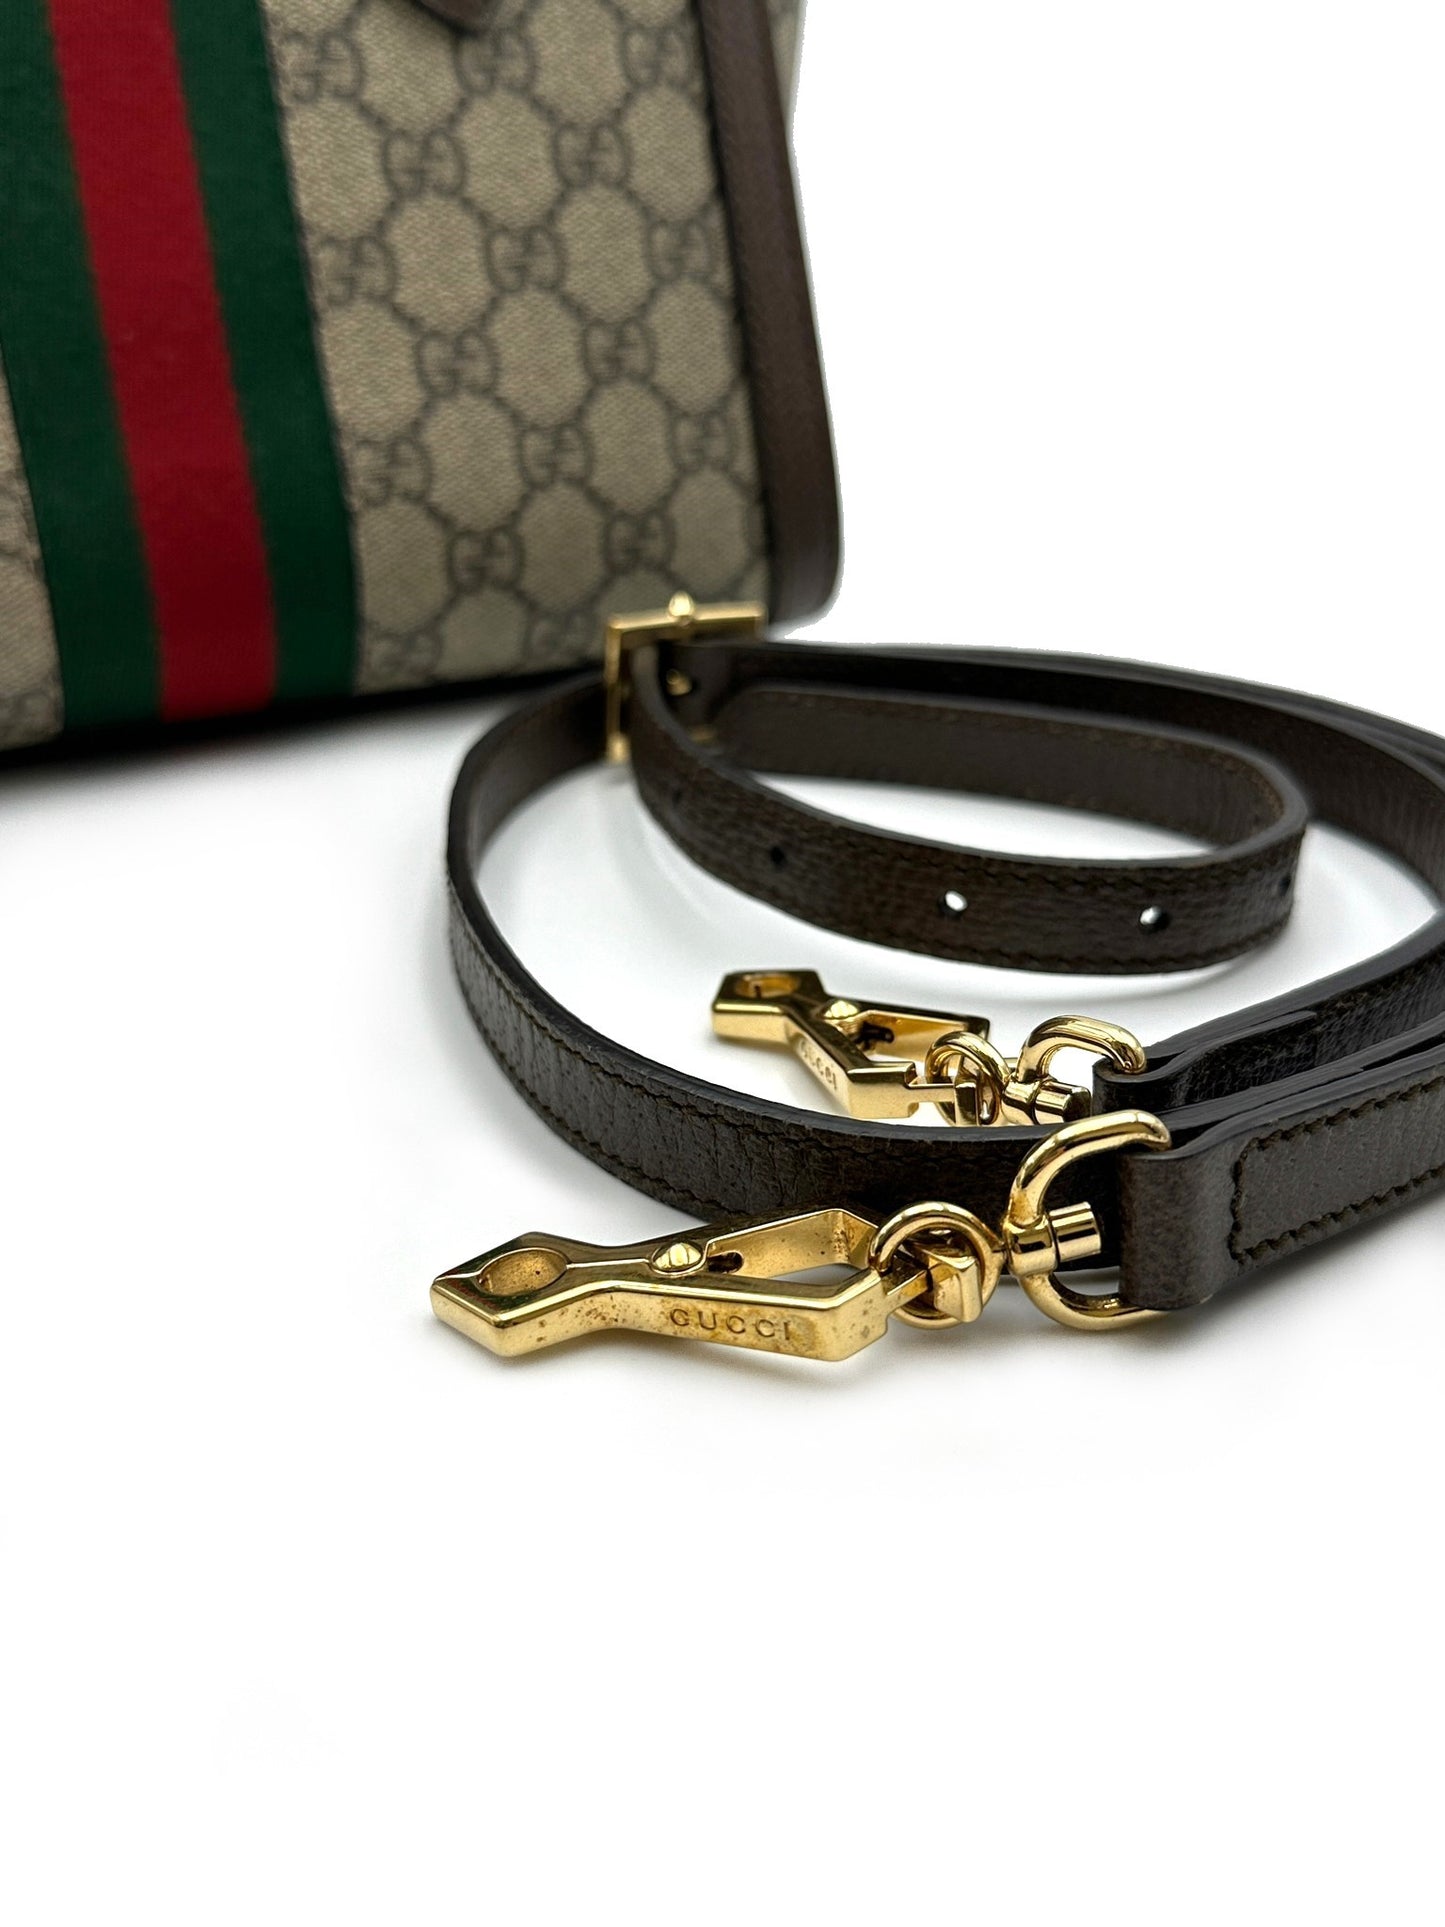 【Preowned】GUCCI Ophidia 老花帆布托特包 - 小號烏木色